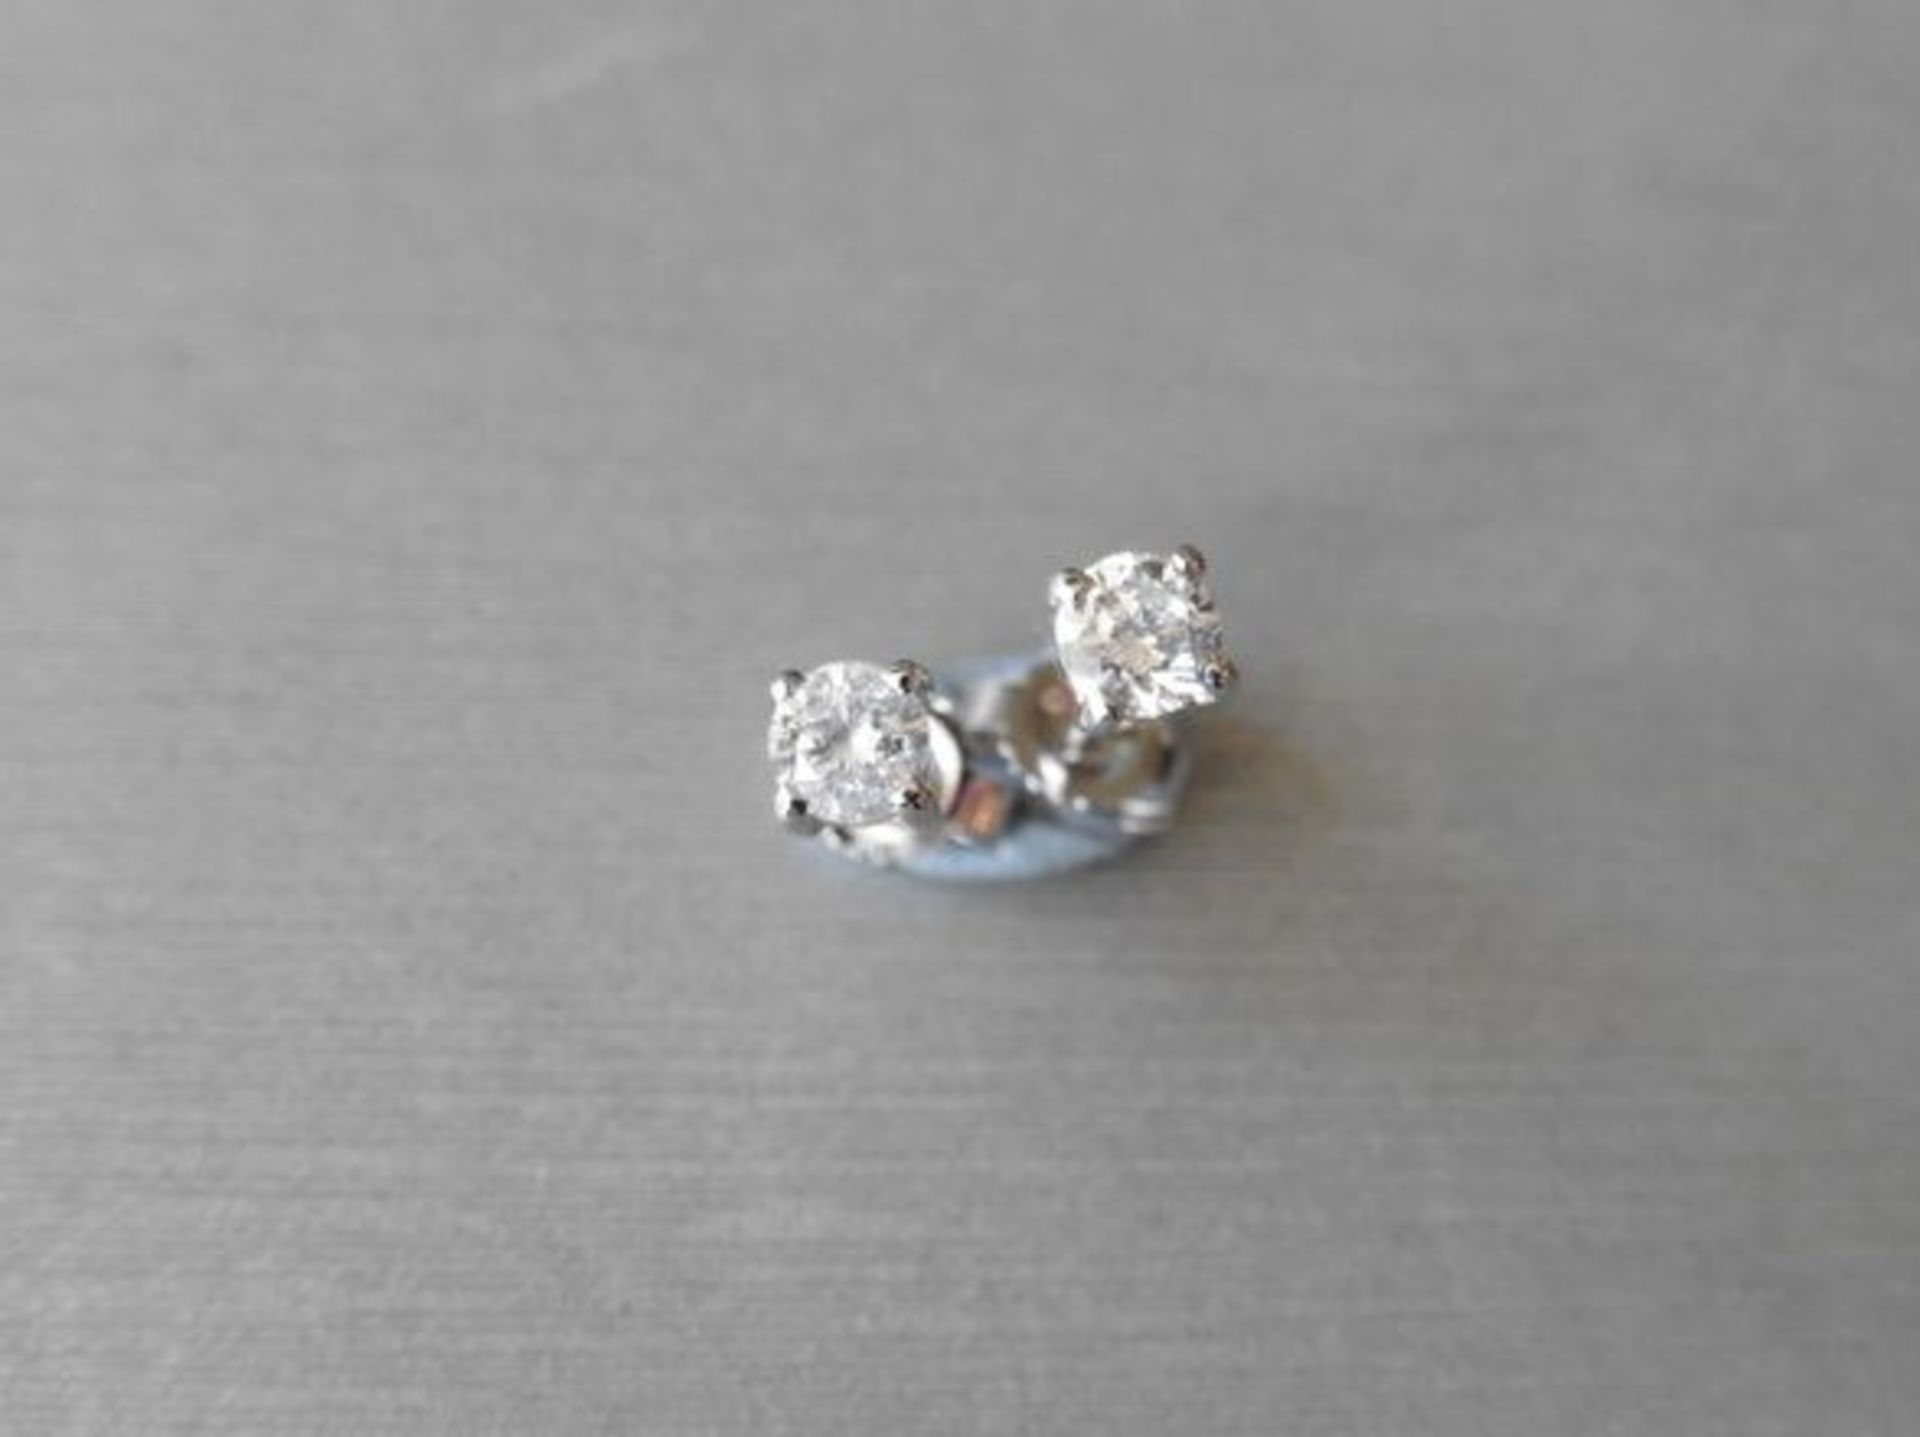 0.25ct diamond solitaire stud earrings set in platinum. I colour, si3 clarity.4 claw setting with